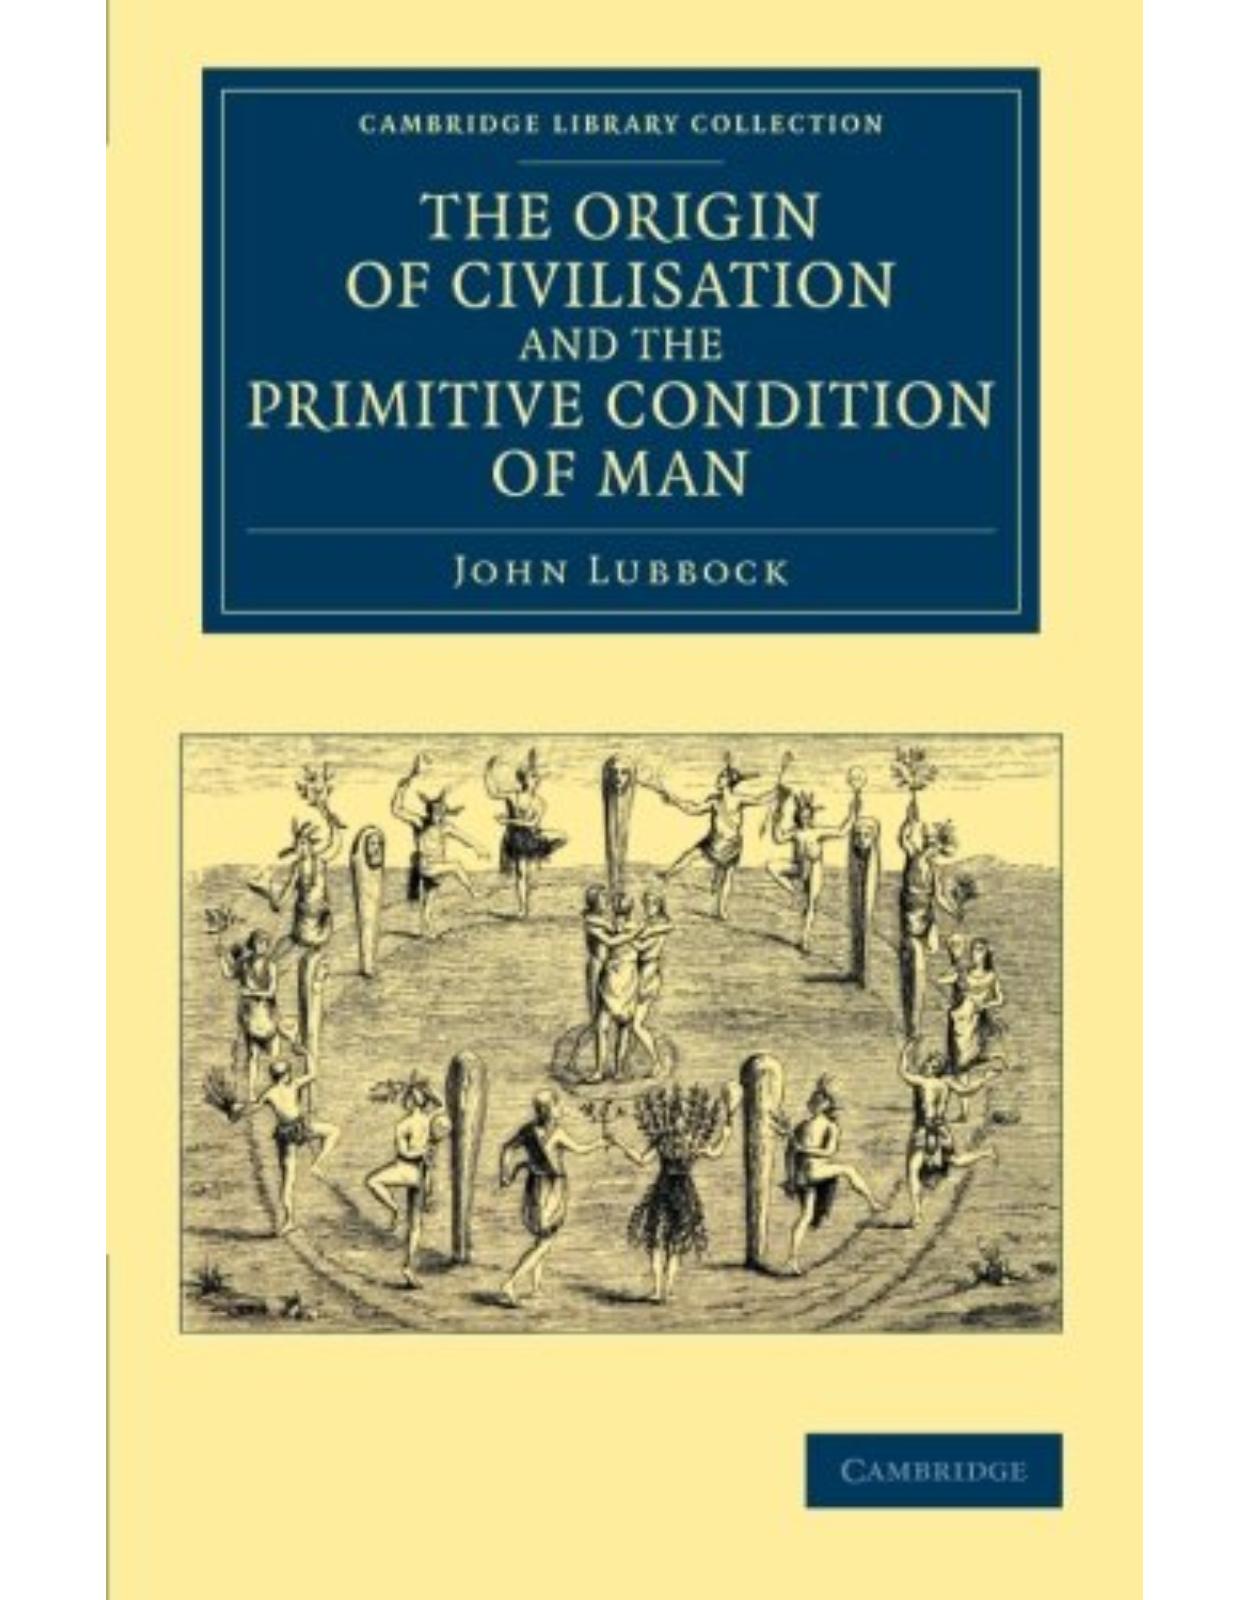 The Origin of Civilisation and the Primitive Condition of Man: Mental and Social Condition of Savages (Cambridge Library Collection - Anthropology)